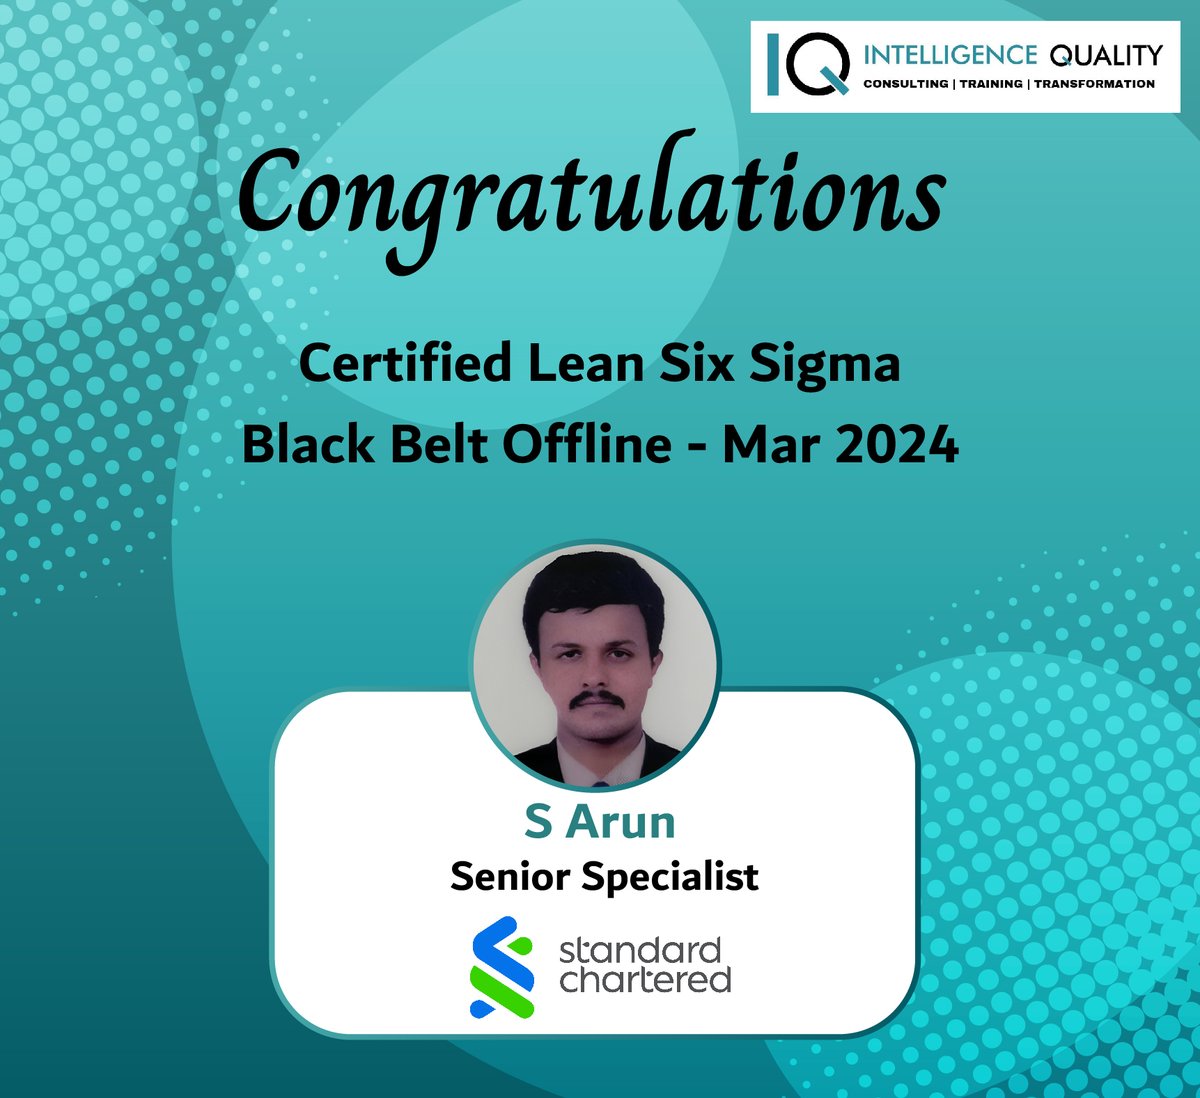 Join BB Batch by expressing your interest at lnkd.in/gSgs9N_D.            
Intelligence Quality would like to congratulate Mr. S ARUN on their completion of the Lean Six Sigma certification.            
#leansixsigma #leansixsigmagreenbelt #leansixsigmablackbelt